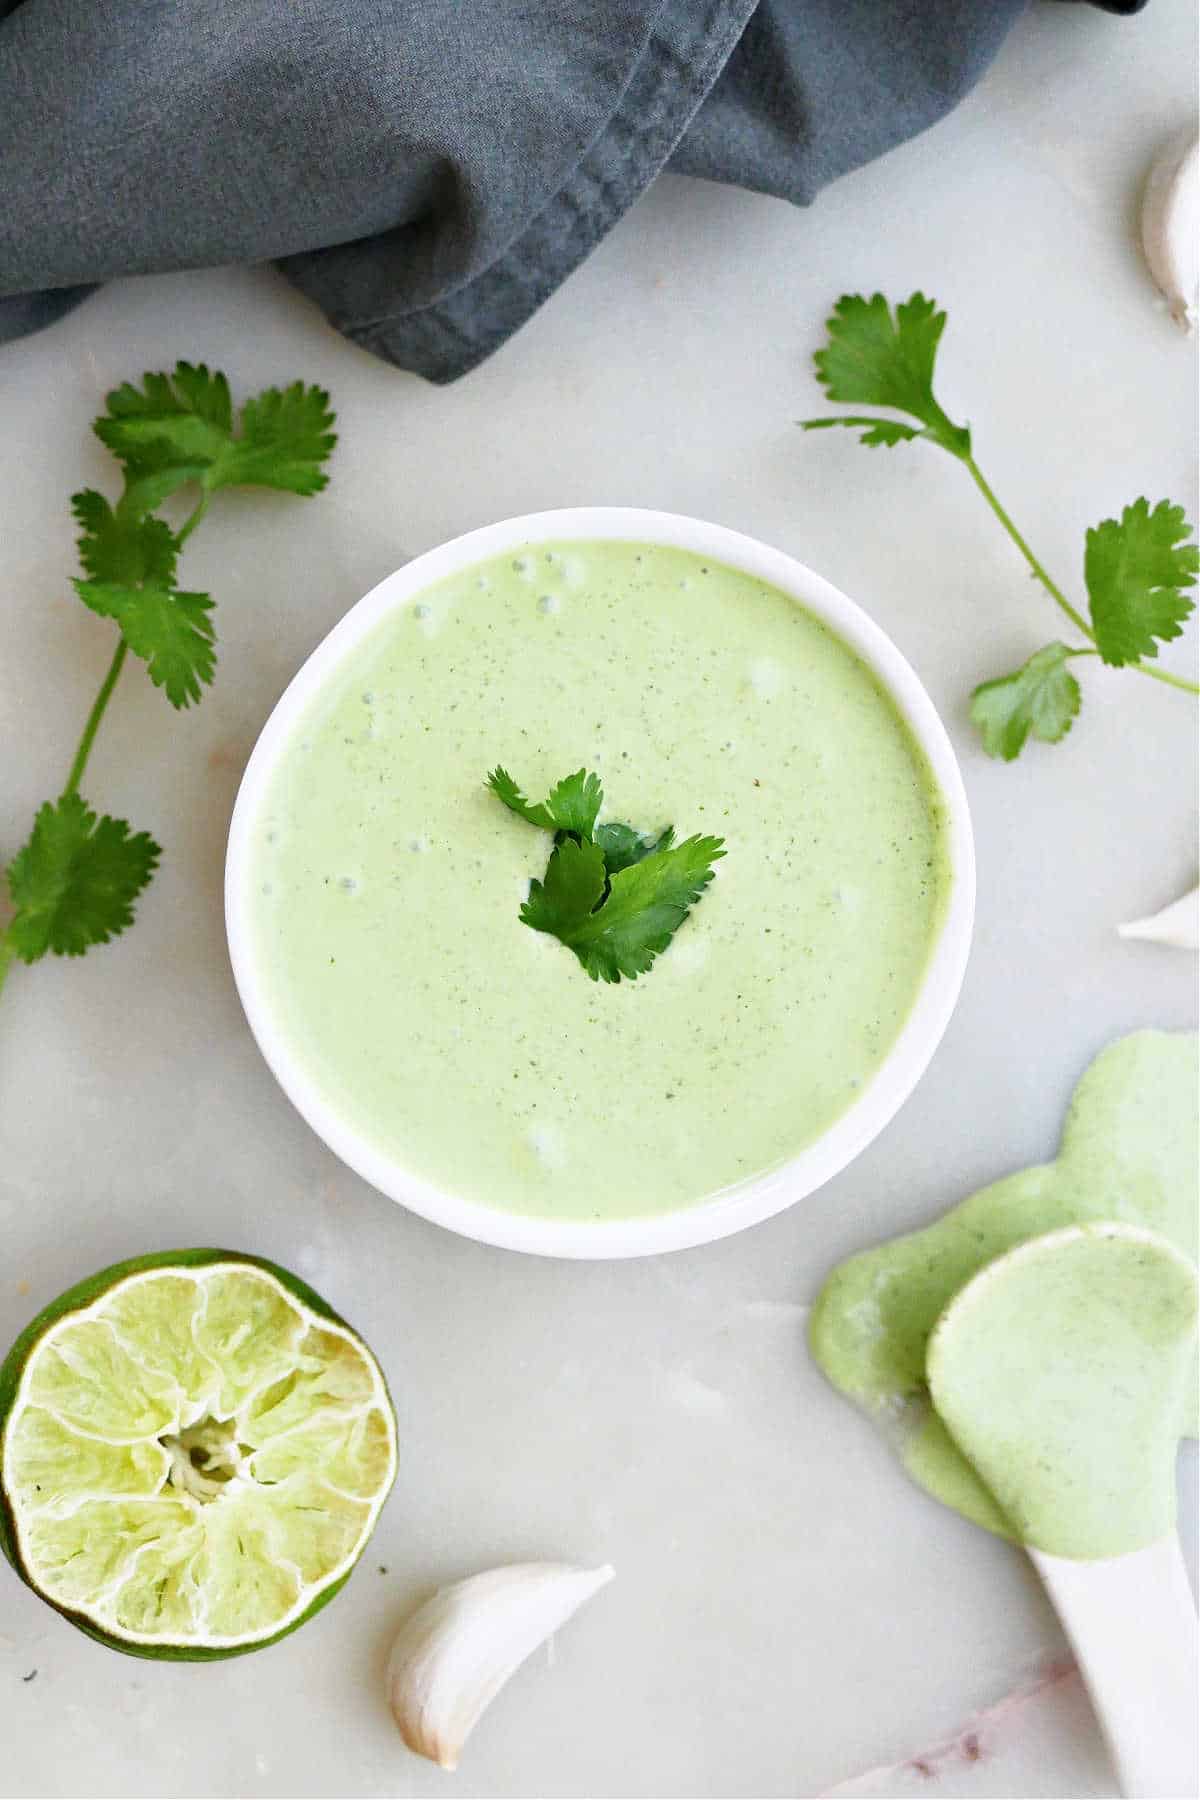 cilantro garlic sauce in a bowl surrounded by ingredients